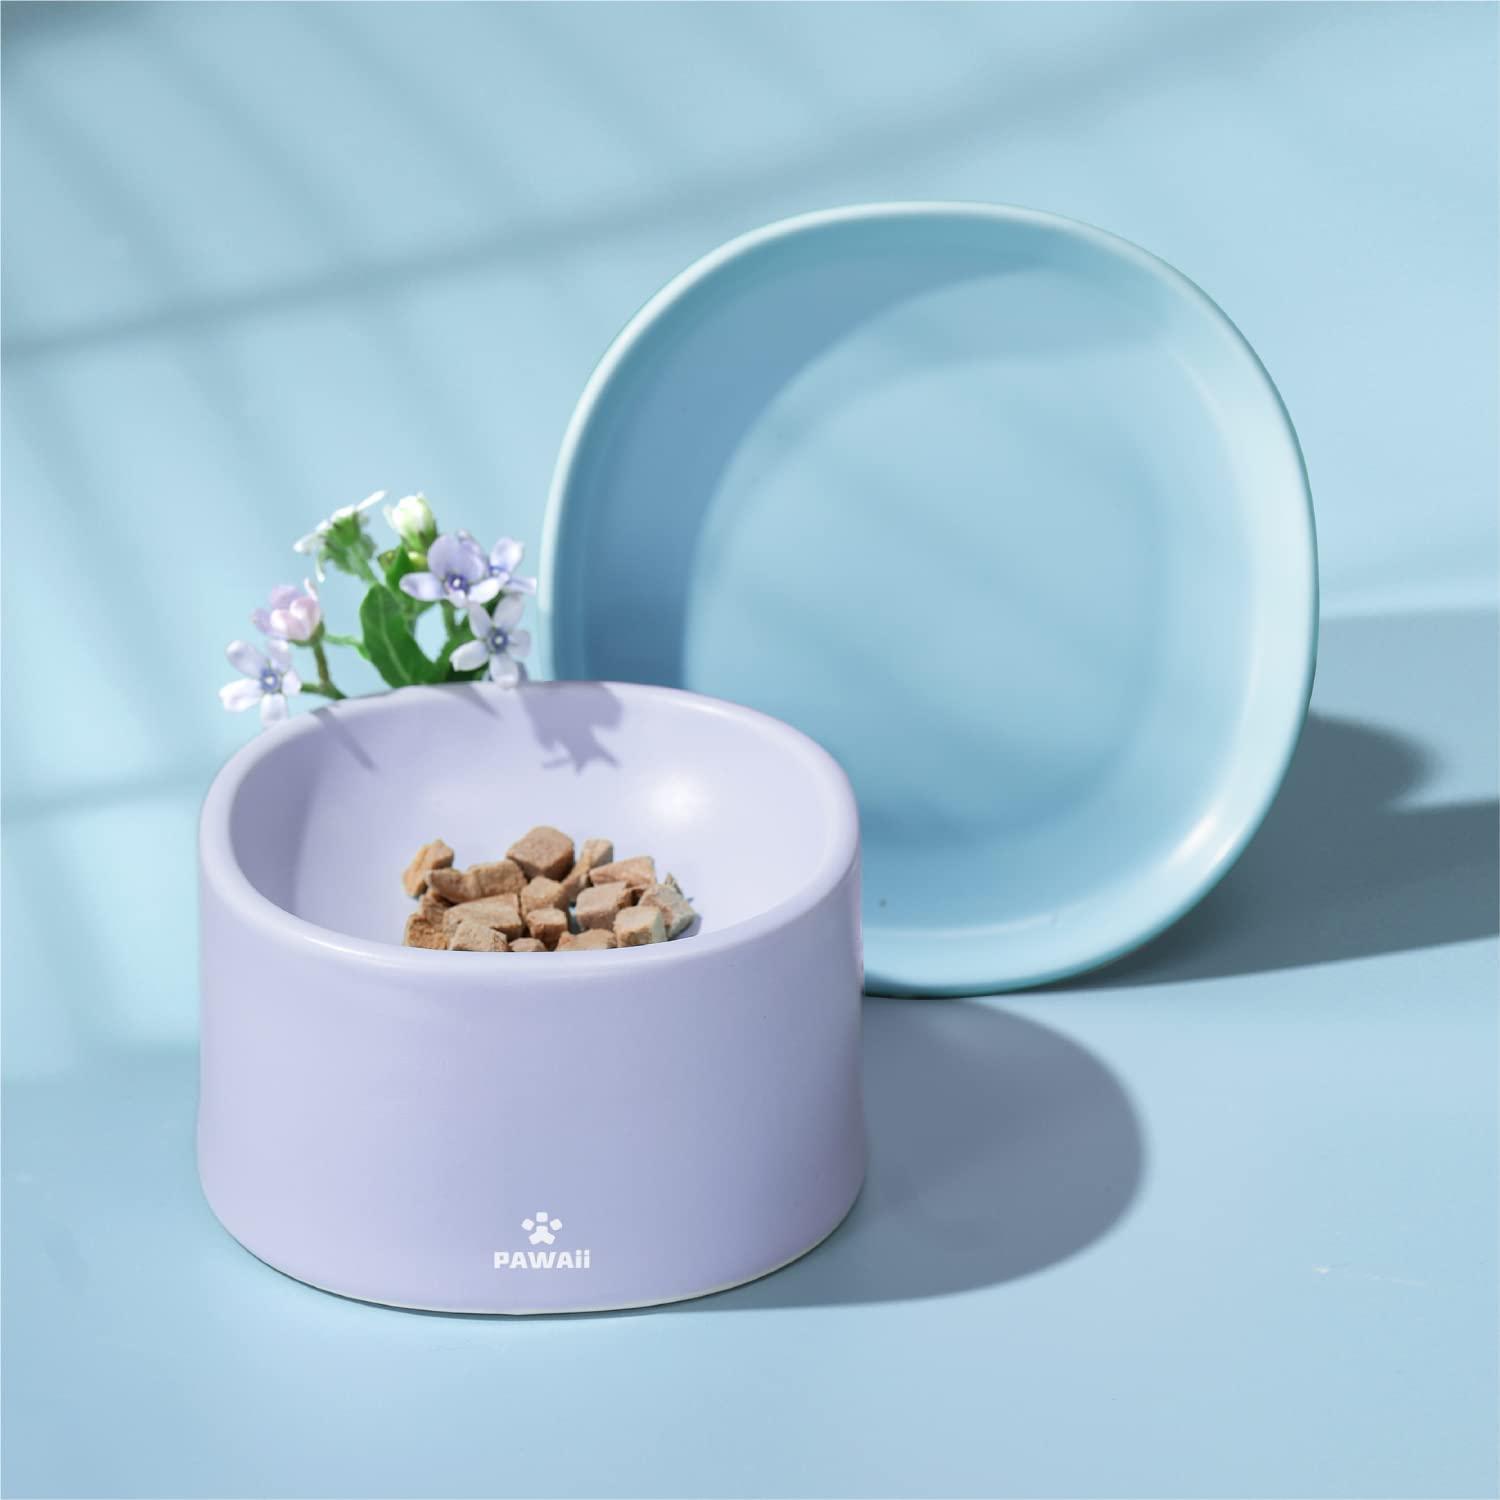 Combined Type Elevated Cat Bowl - Pawaii Purple Bowl and Blue Dish